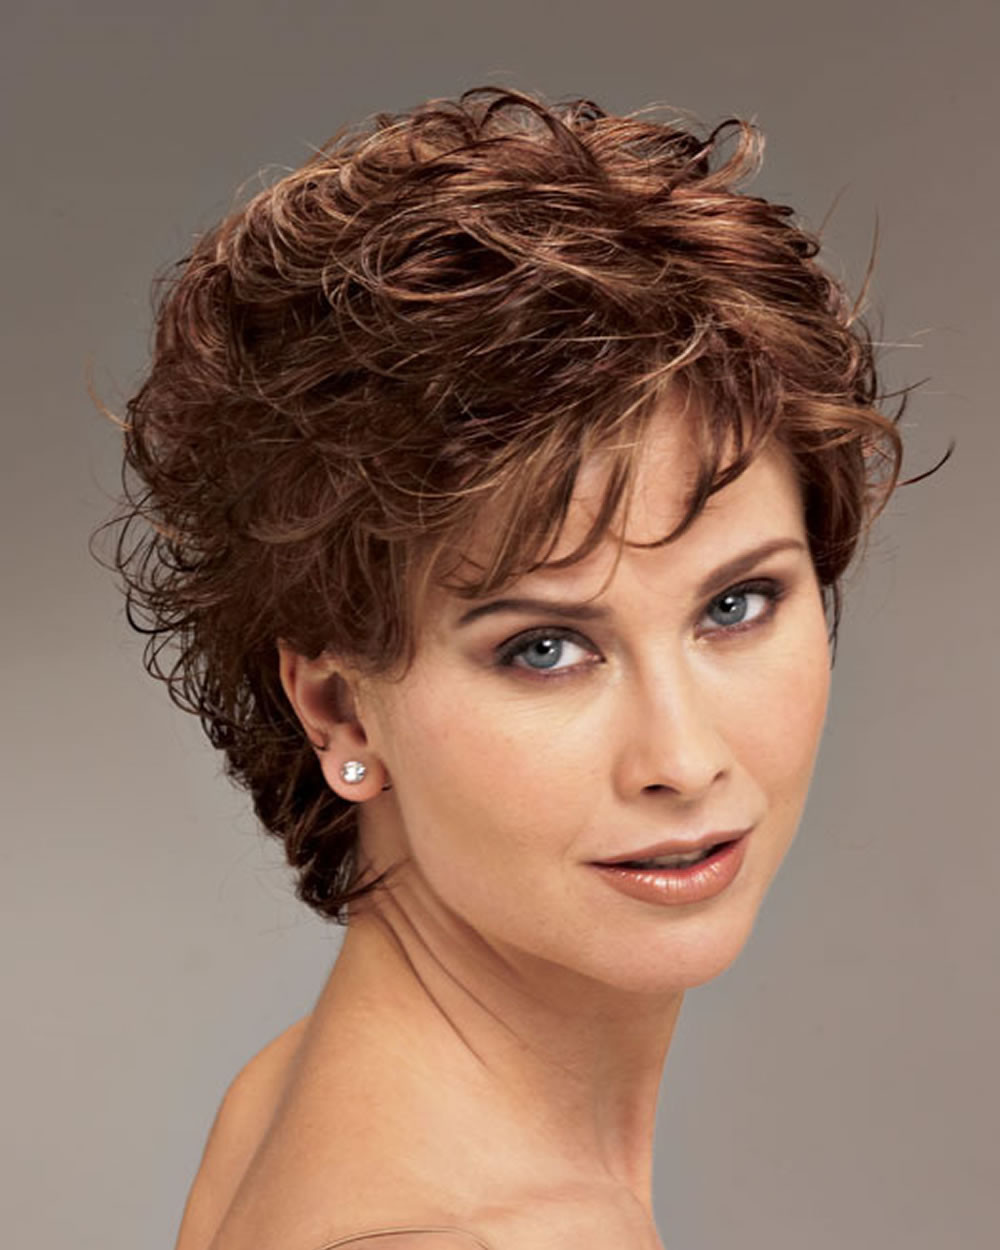 Hairstyles For Curly Hair
 22 Popular Hairstyles for Curly Short Hair